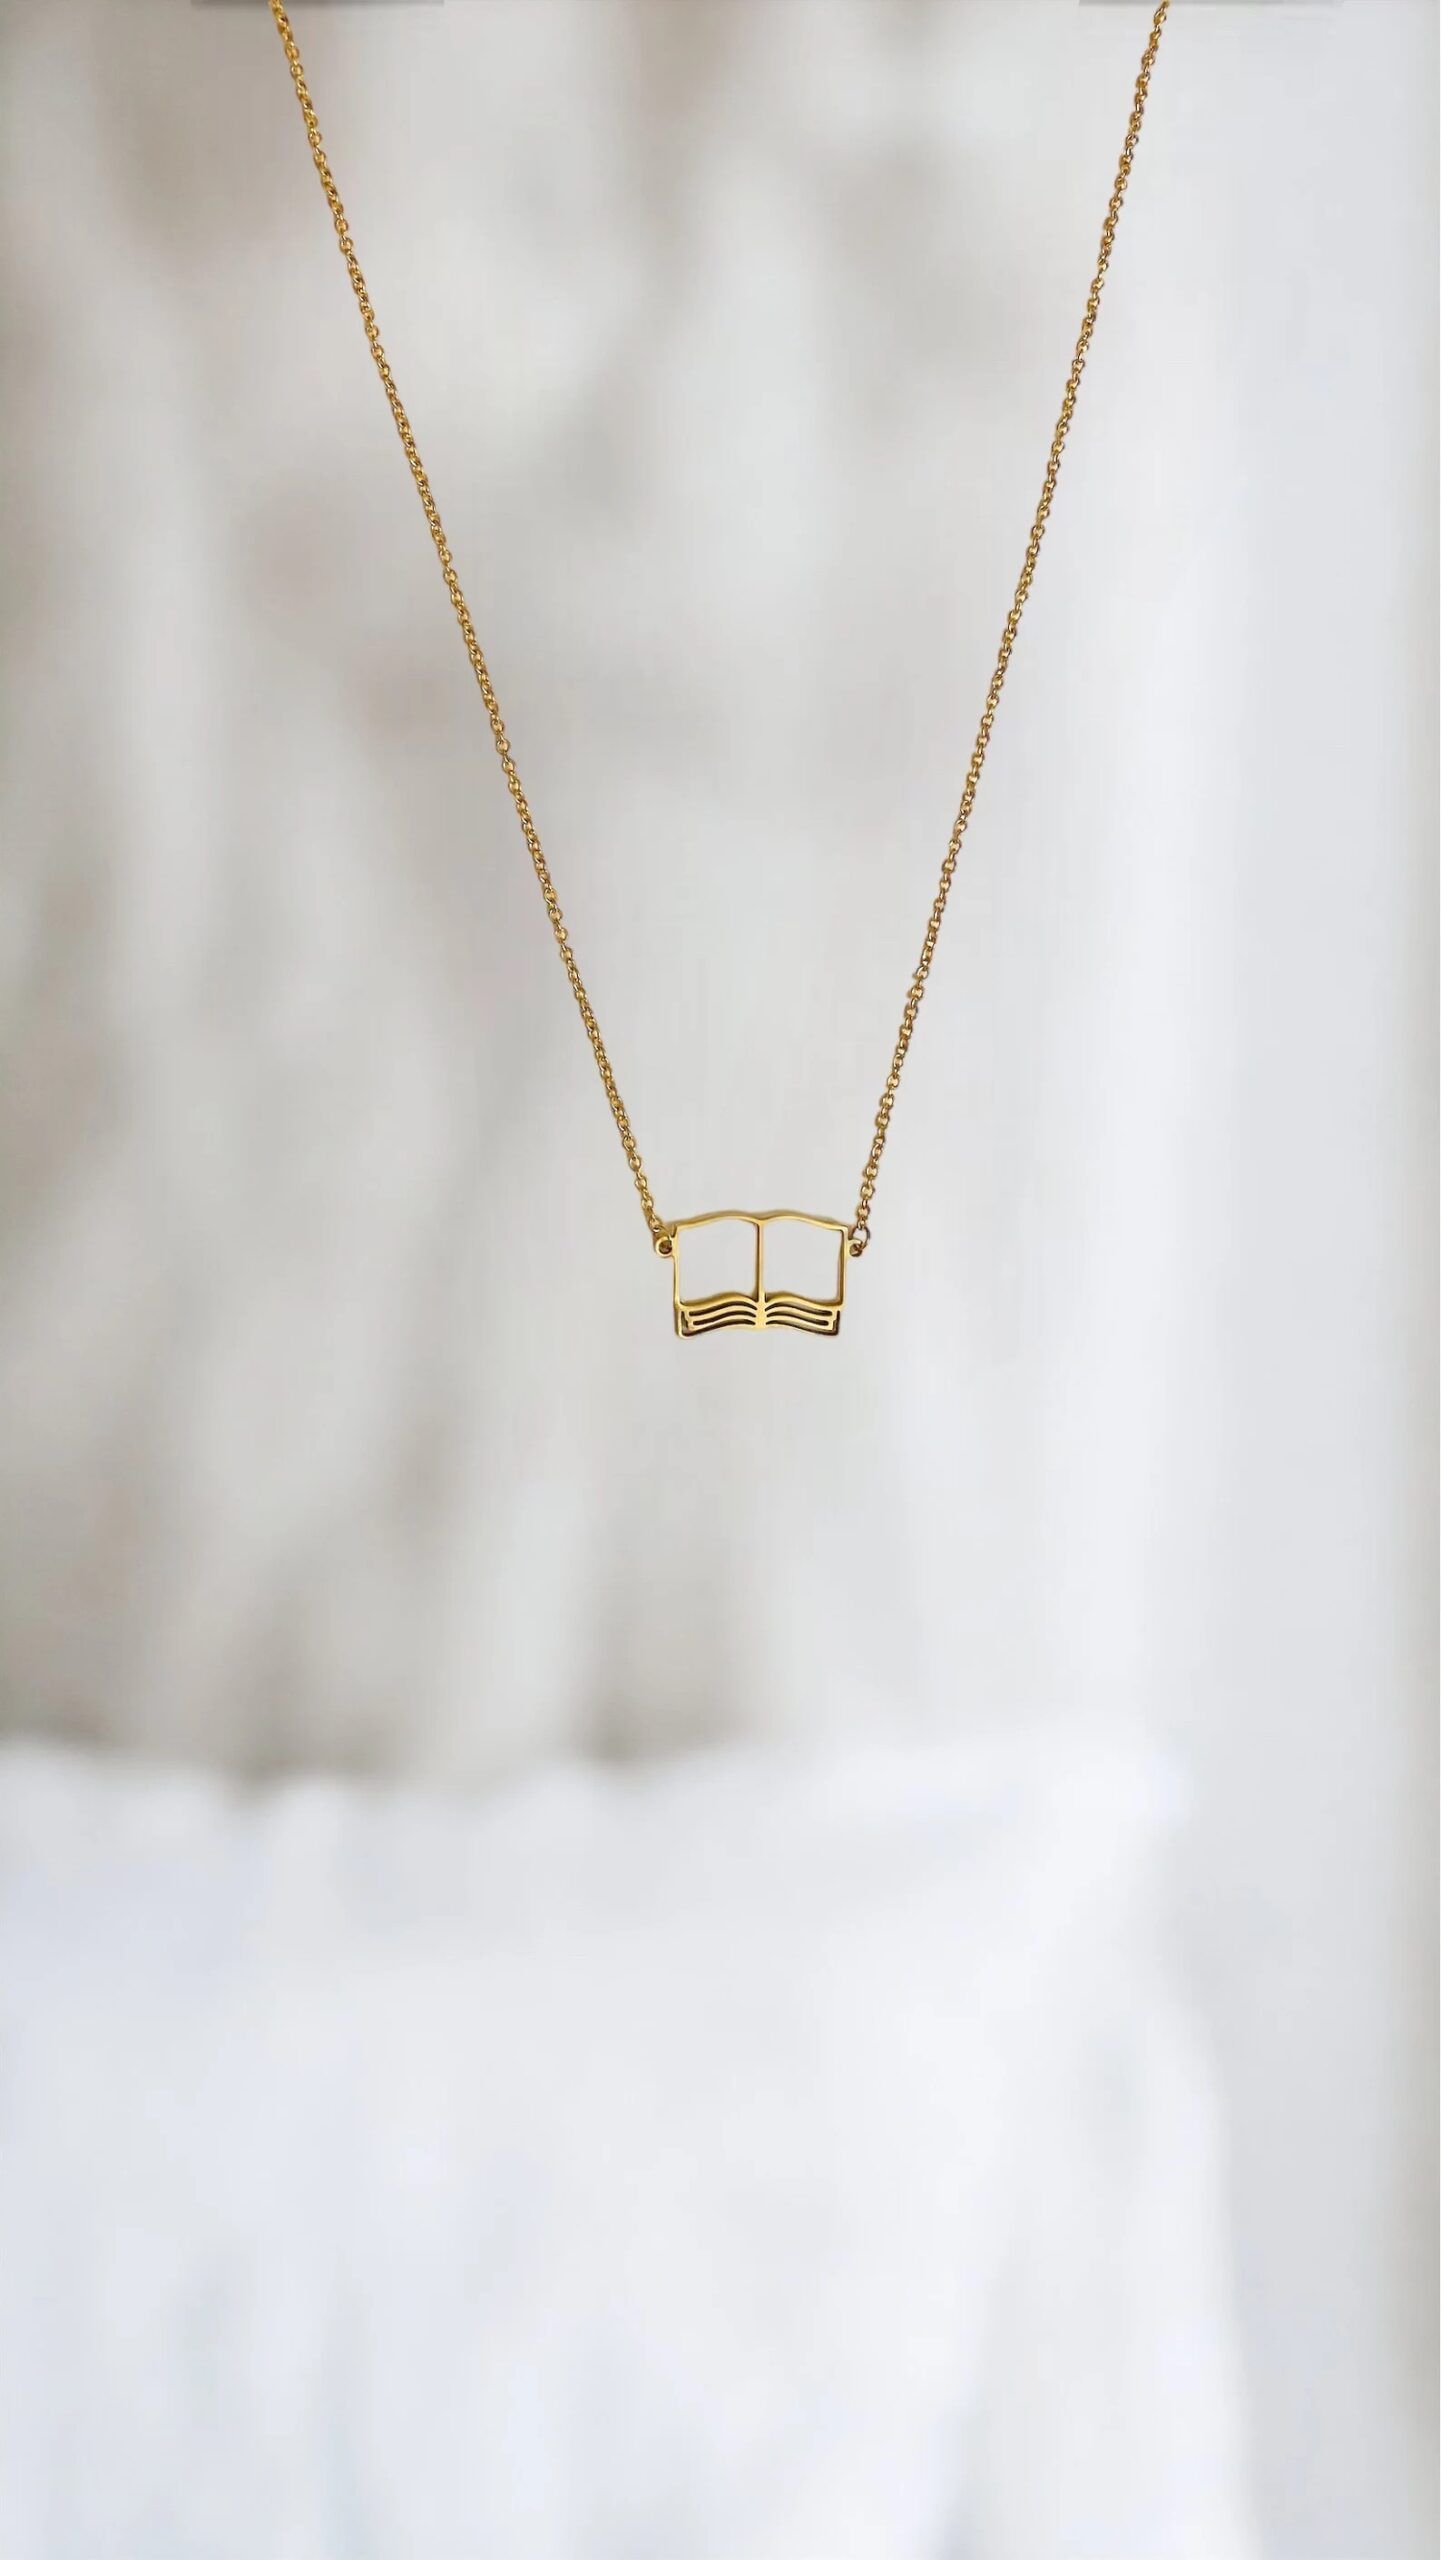 A golden open book necklace in front of a white background.